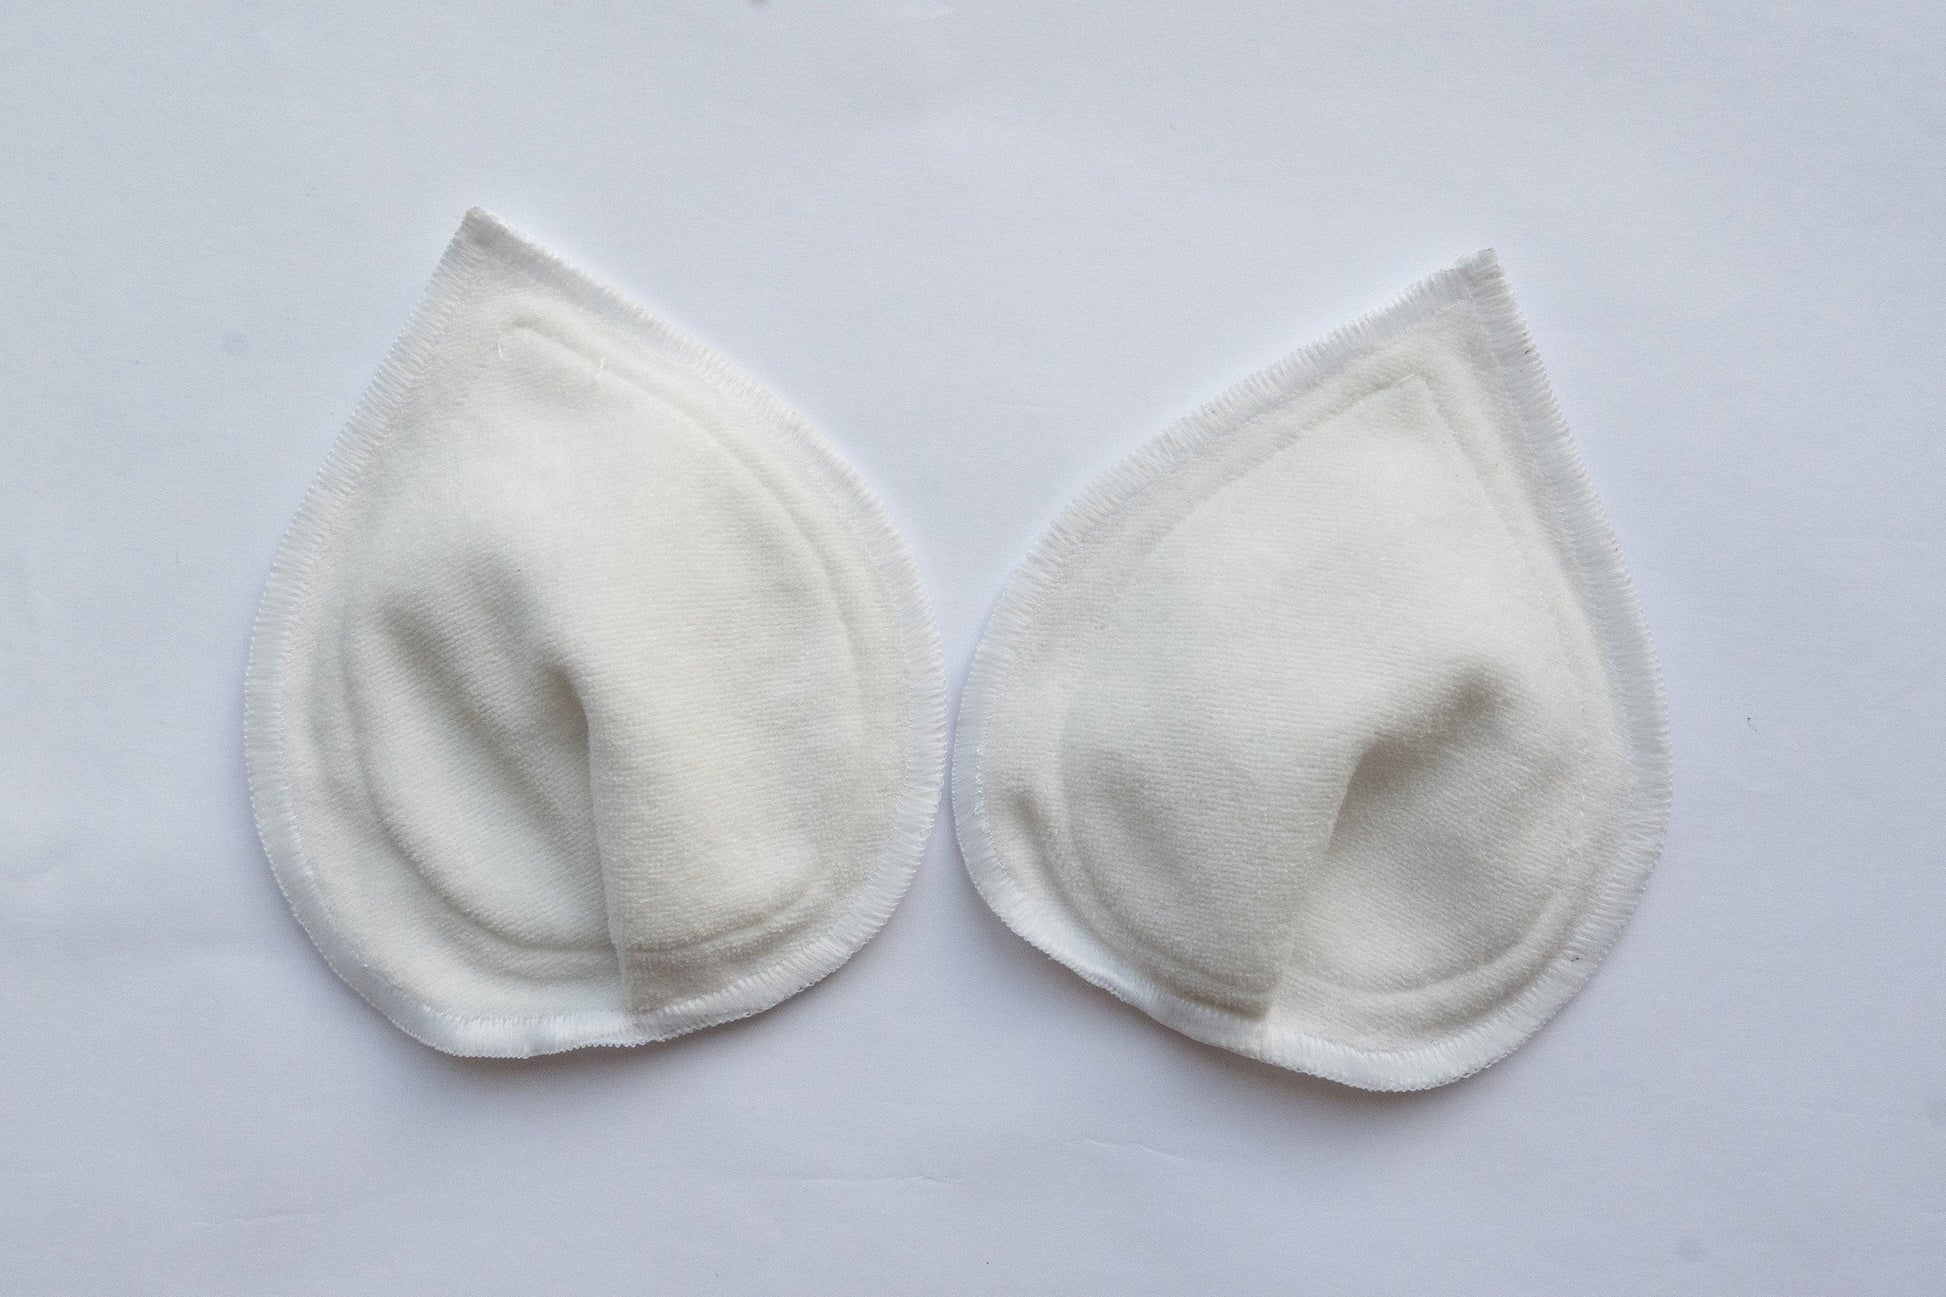 Safepad Breast Pads - RealReliefWay